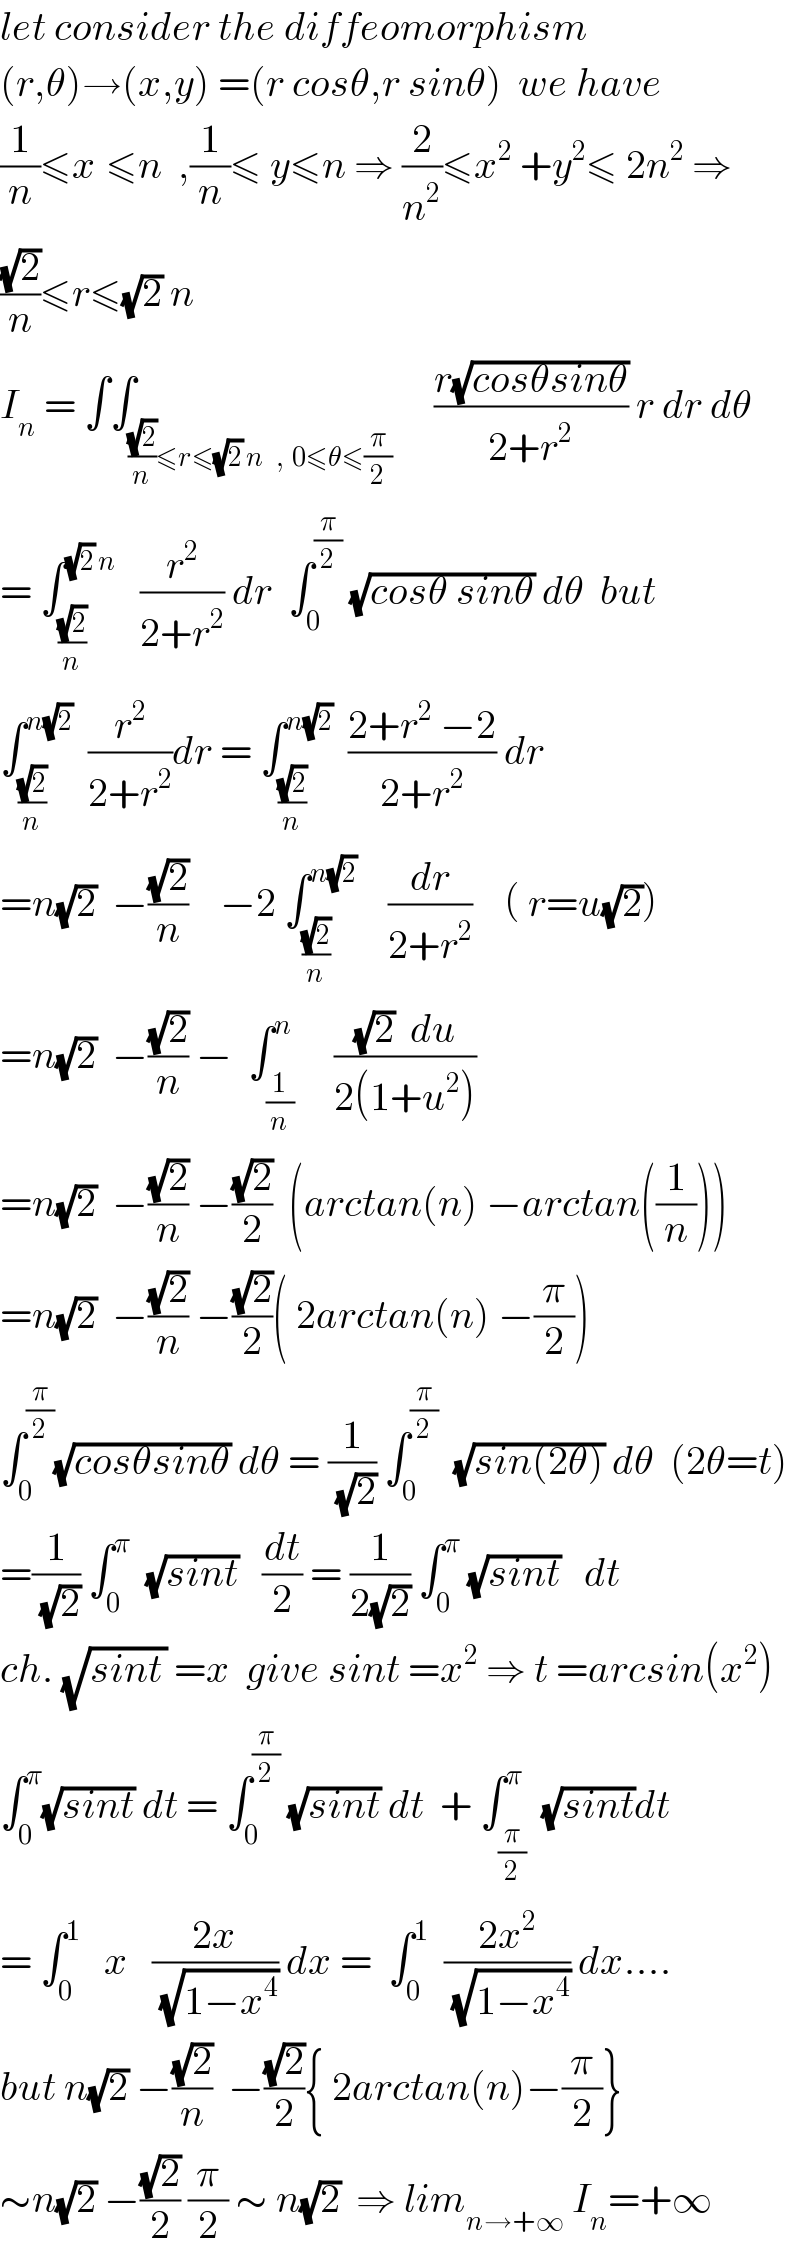 let consider the diffeomorphism  (r,θ)→(x,y) =(r cosθ,r sinθ)  we have  (1/n)≤x^ ≤n  ,(1/n)≤ y≤n ⇒ (2/n^2 )≤x^2  +y^2 ≤ 2n^2  ⇒  ((√2)/n)≤r≤(√2) n  I_n  = ∫∫_(((√2)/n)≤r≤(√2) n   ,  0≤θ≤(π/2))     ((r(√(cosθsinθ)))/(2+r^2 )) r dr dθ  = ∫_(((√2)/n) ) ^((√2) n)    (r^2 /(2+r^2 )) dr  ∫_0 ^(π/2)  (√(cosθ sinθ)) dθ  but  ∫_((√2)/n) ^(n(√2))   (r^2 /(2+r^2 ))dr = ∫_((√2)/n) ^(n(√2))   ((2+r^2  −2)/(2+r^2 )) dr  =n(√2)  −((√2)/n)    −2 ∫_((√2)/n) ^(n(√2))     (dr/(2+r^2 ))    ( r=u(√2))  =n(√2)  −((√2)/n) −  ∫_(1/n) ^n     (((√2)  du)/(2(1+u^2 )))  =n(√2)  −((√2)/n) −((√2)/2)  (arctan(n) −arctan((1/n)))  =n(√2)  −((√2)/n) −((√2)/2)( 2arctan(n) −(π/2))  ∫_0 ^(π/2) (√(cosθsinθ)) dθ = (1/(√2)) ∫_0 ^(π/2)   (√(sin(2θ))) dθ  (2θ=t)  =(1/(√2)) ∫_0 ^π   (√(sint))   (dt/2) = (1/(2(√2))) ∫_0 ^π  (√(sint))   dt  ch. (√(sint_  )) =x  give sint =x^2  ⇒ t =arcsin(x^2 )  ∫_0 ^π (√(sint)) dt = ∫_0 ^(π/2)  (√(sint)) dt  + ∫_(π/2) ^π  (√(sint))dt  = ∫_0 ^1    x   ((2x)/(√(1−x^4 ))) dx =  ∫_0 ^1   ((2x^2 )/(√(1−x^4 ))) dx....  but n(√2) −((√2)/n)  −((√2)/2){ 2arctan(n)−(π/2)}  ∼n(√2) −((√2)/2) (π/2) ∼ n(√2)  ⇒ lim_(n→+∞)  I_n =+∞  